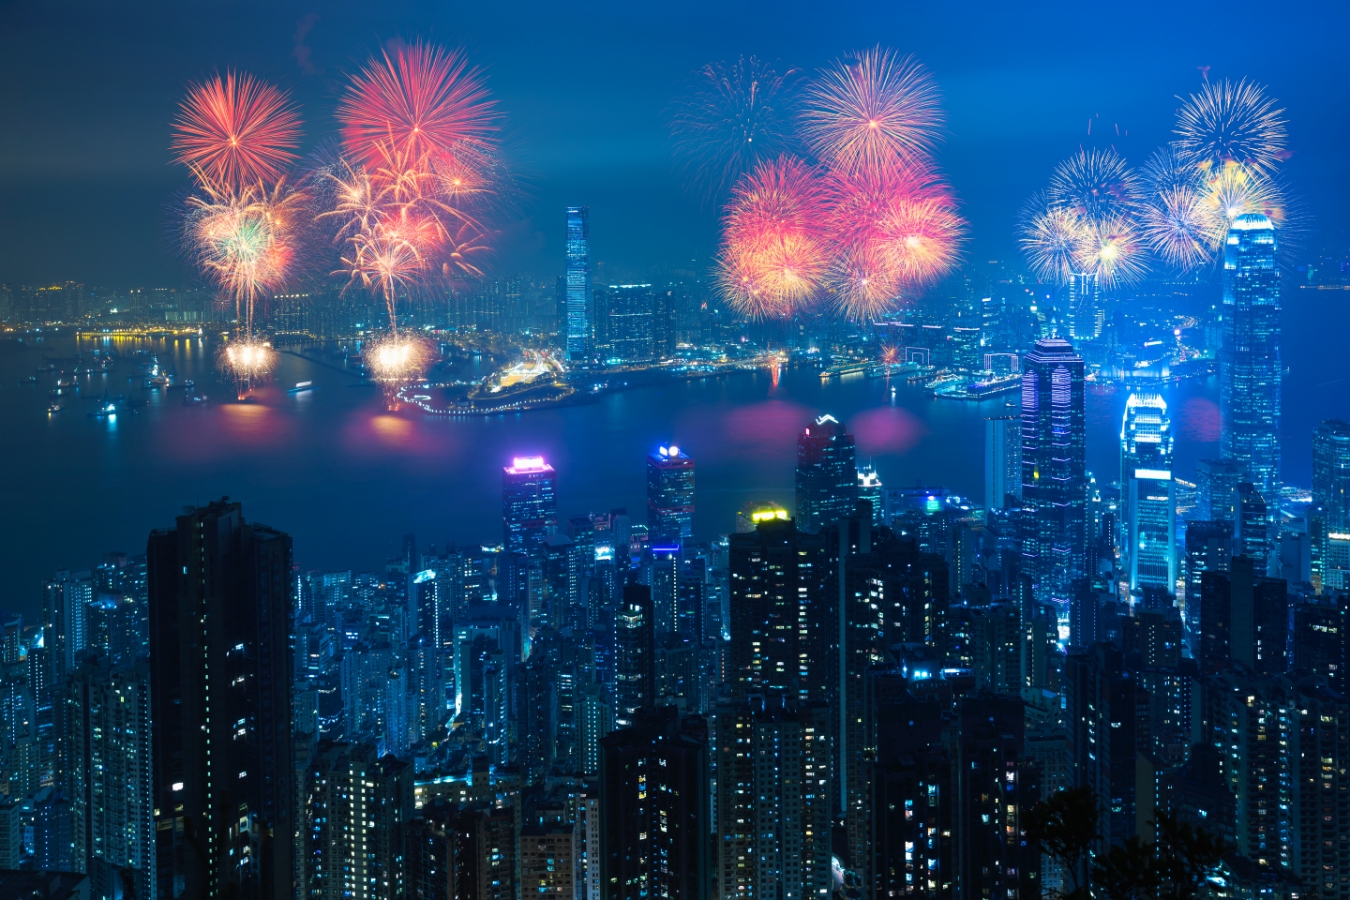 a view of the fireworks in hong kong from the peak. the hong kong island skyscrapers are in the foreground and the kowloon skyline is in the background.